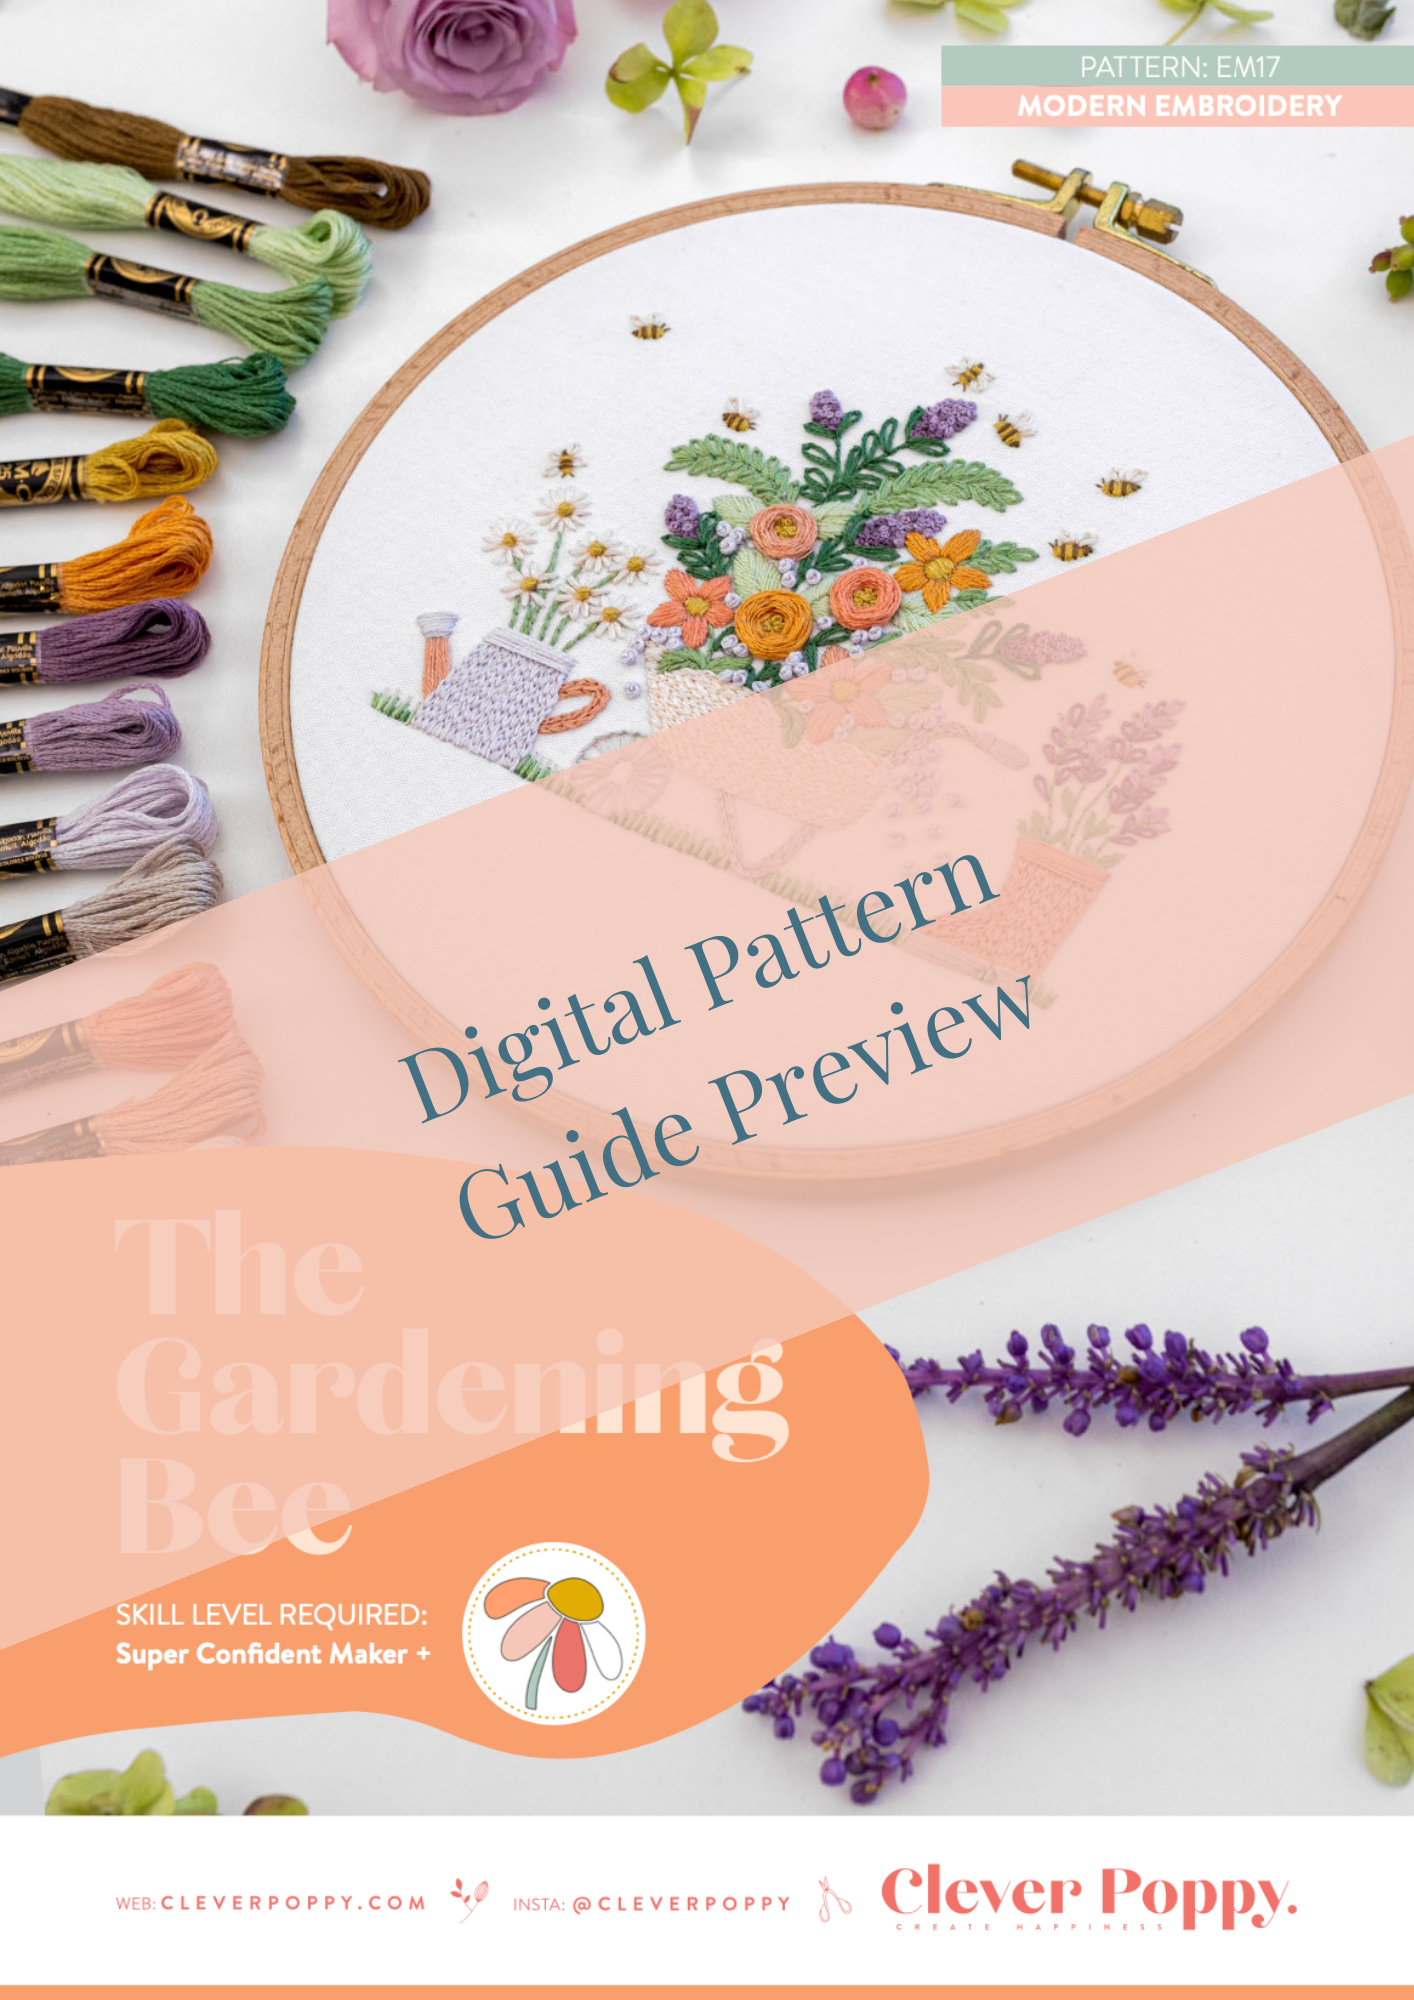 The Gardening Bee Embroidery Kit